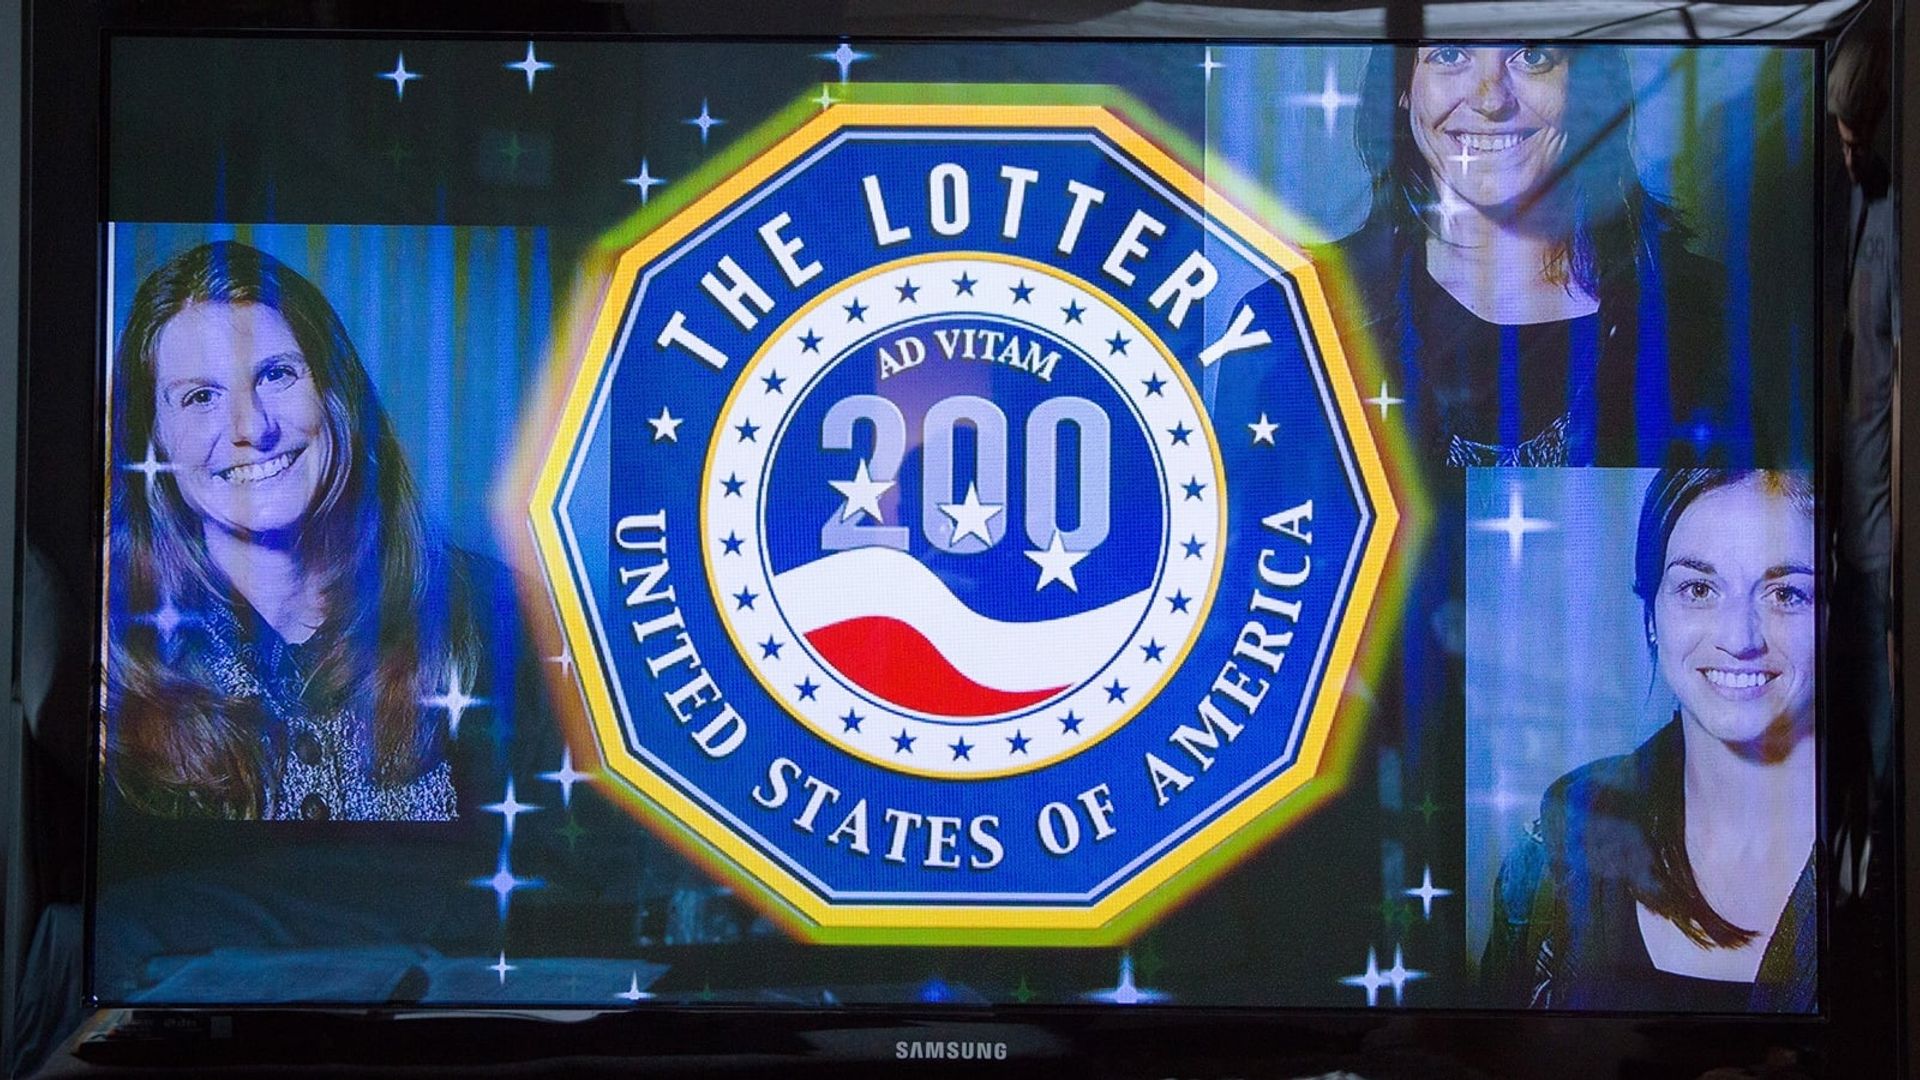 The Lottery background